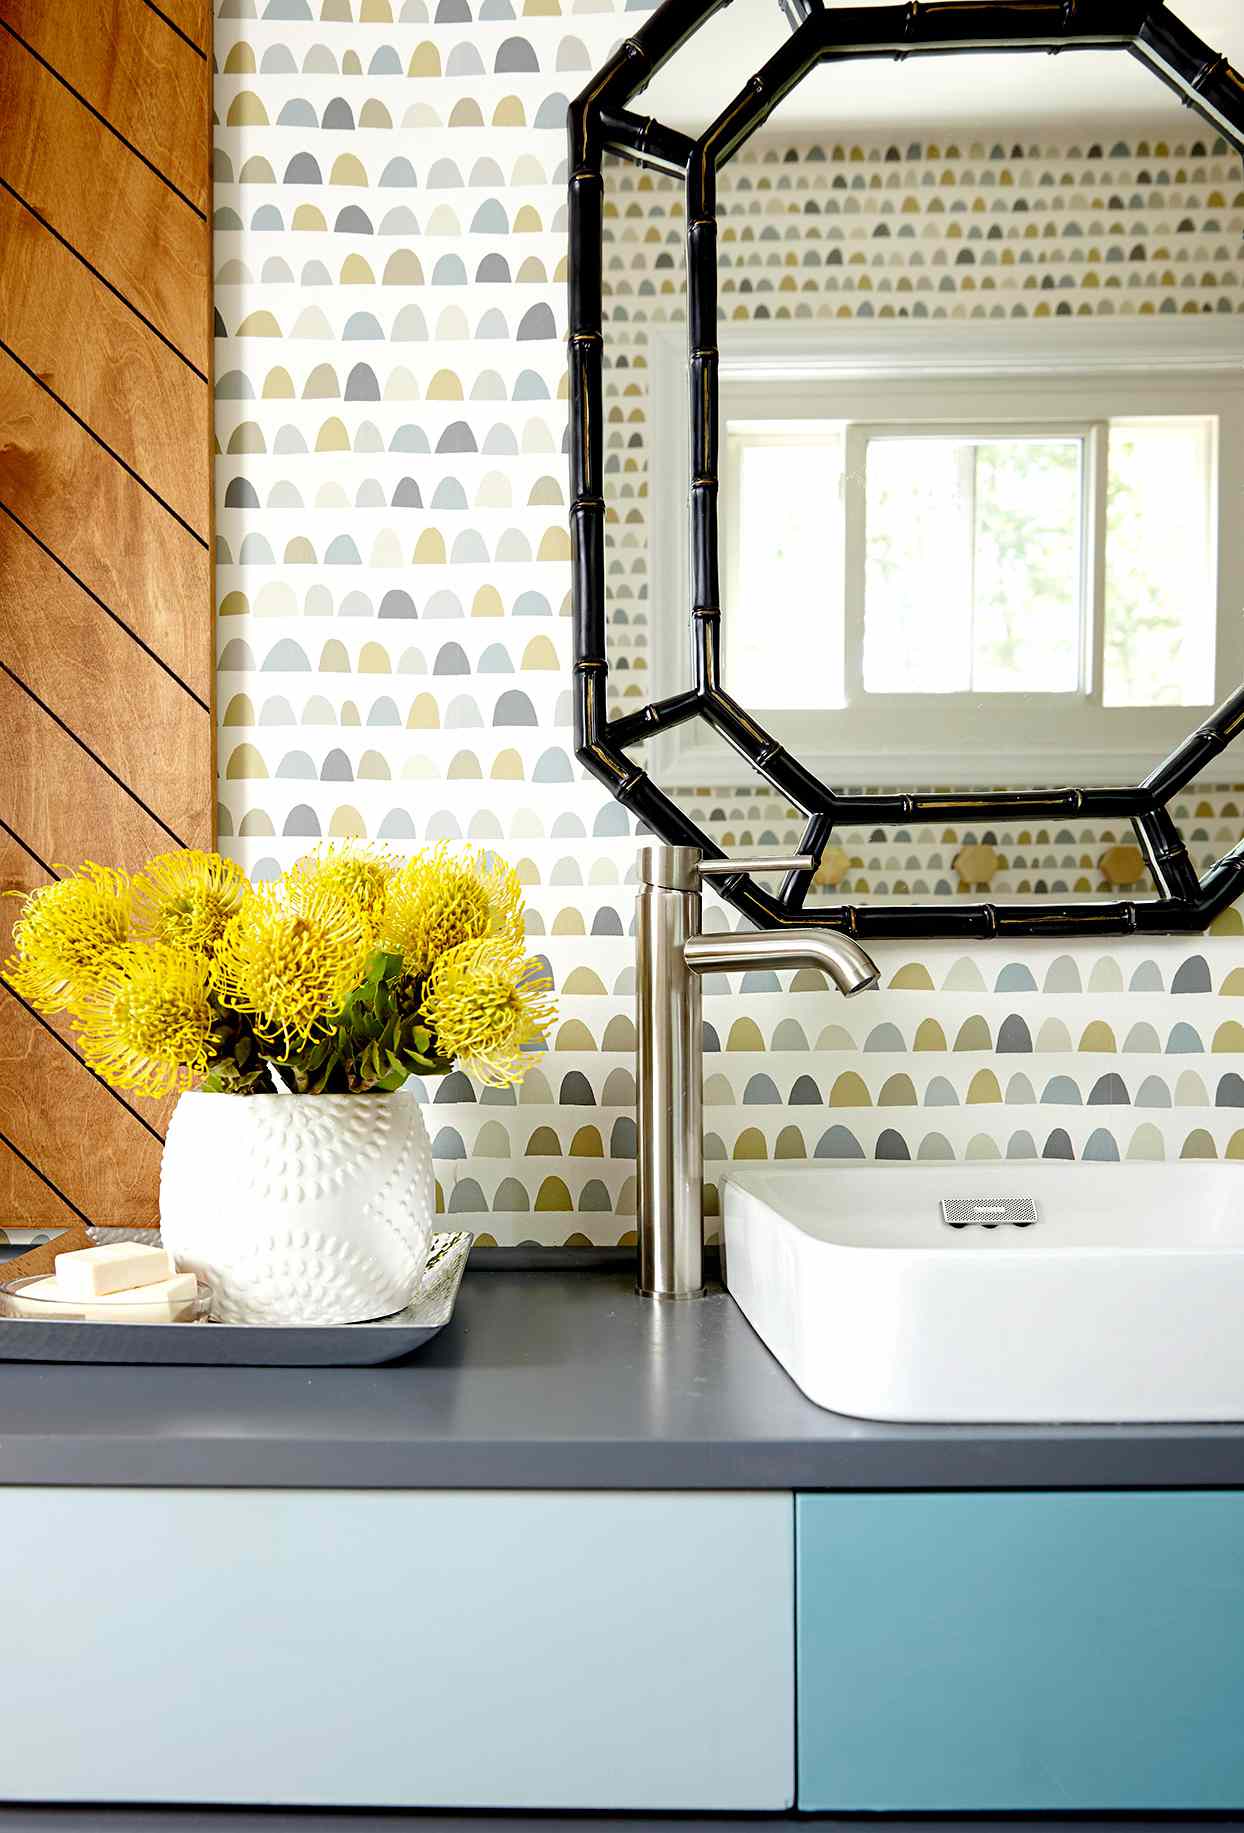 Bathroom sink with patterned wallpaper